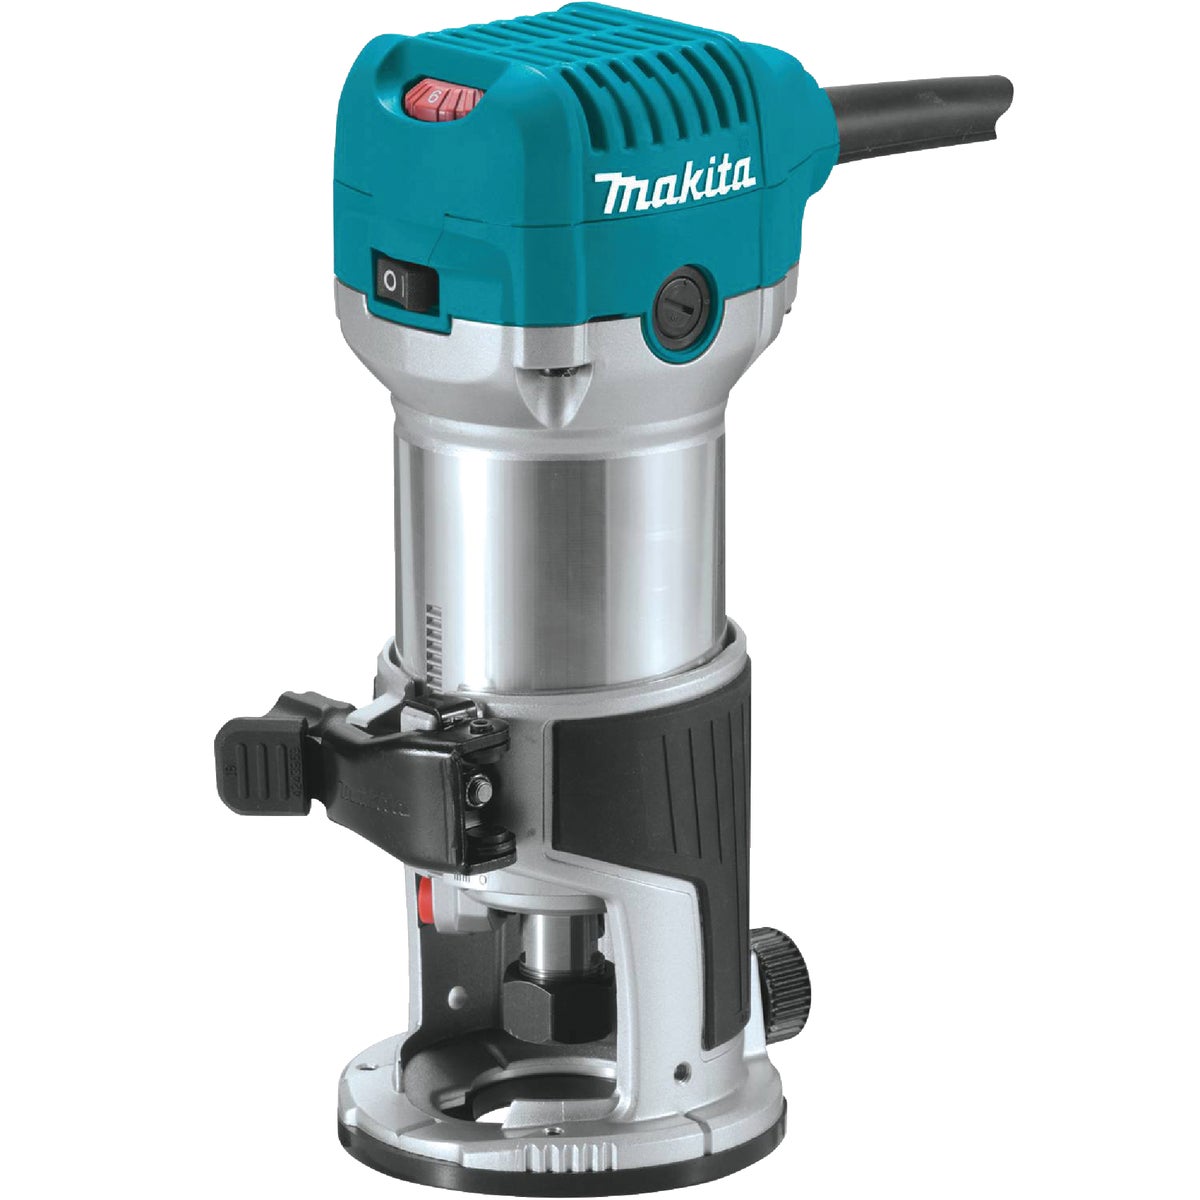 Makita 1-1/4 HP/6.5A 10,000-30,000 rpm Variable Speed Compact Router